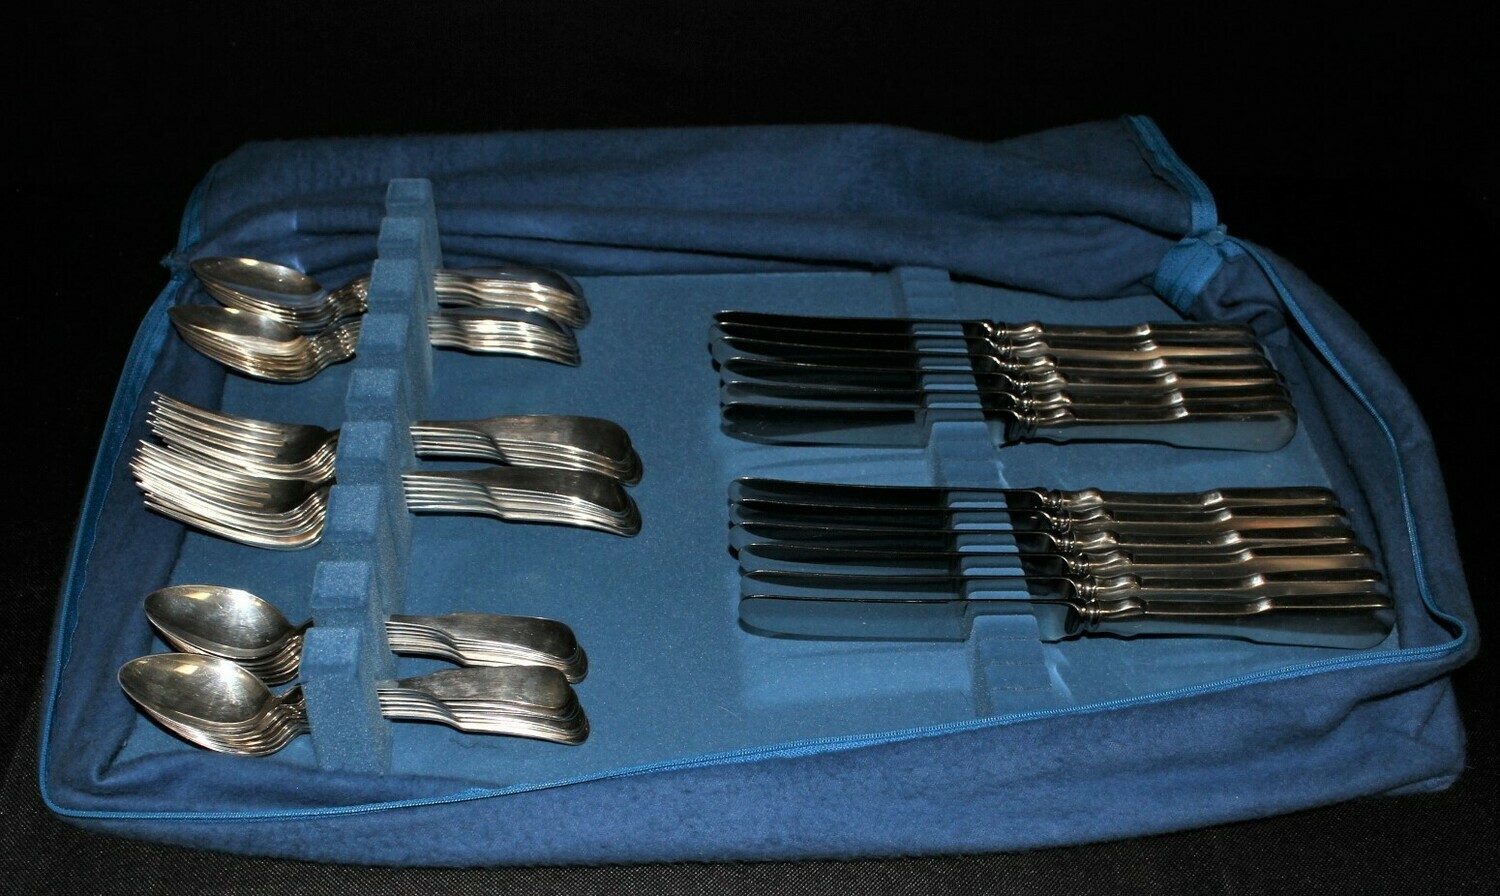 1979 Towle Sterling Silver MDCXC 1690 Service for 12 Flatware, 48 Piece Set